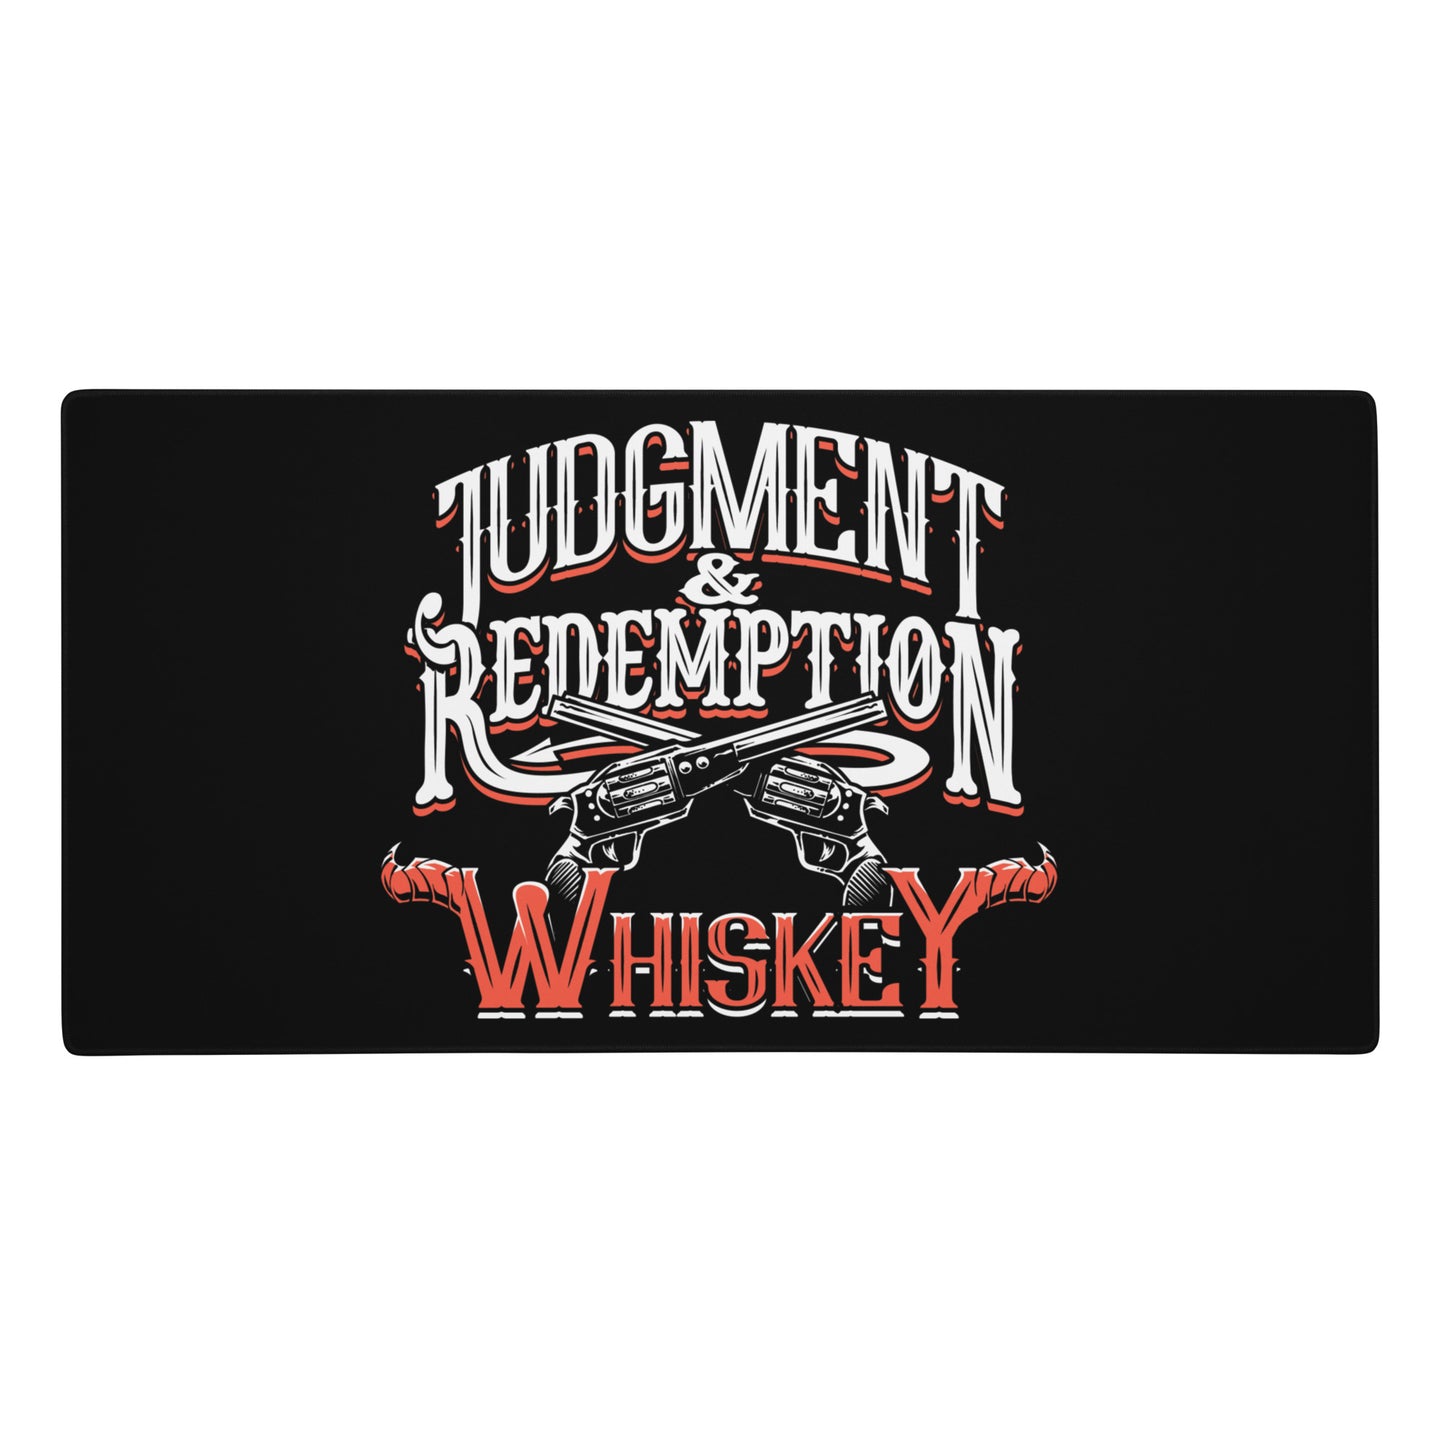 Judgment & Redemption Whiskey - Gaming Mouse Pad